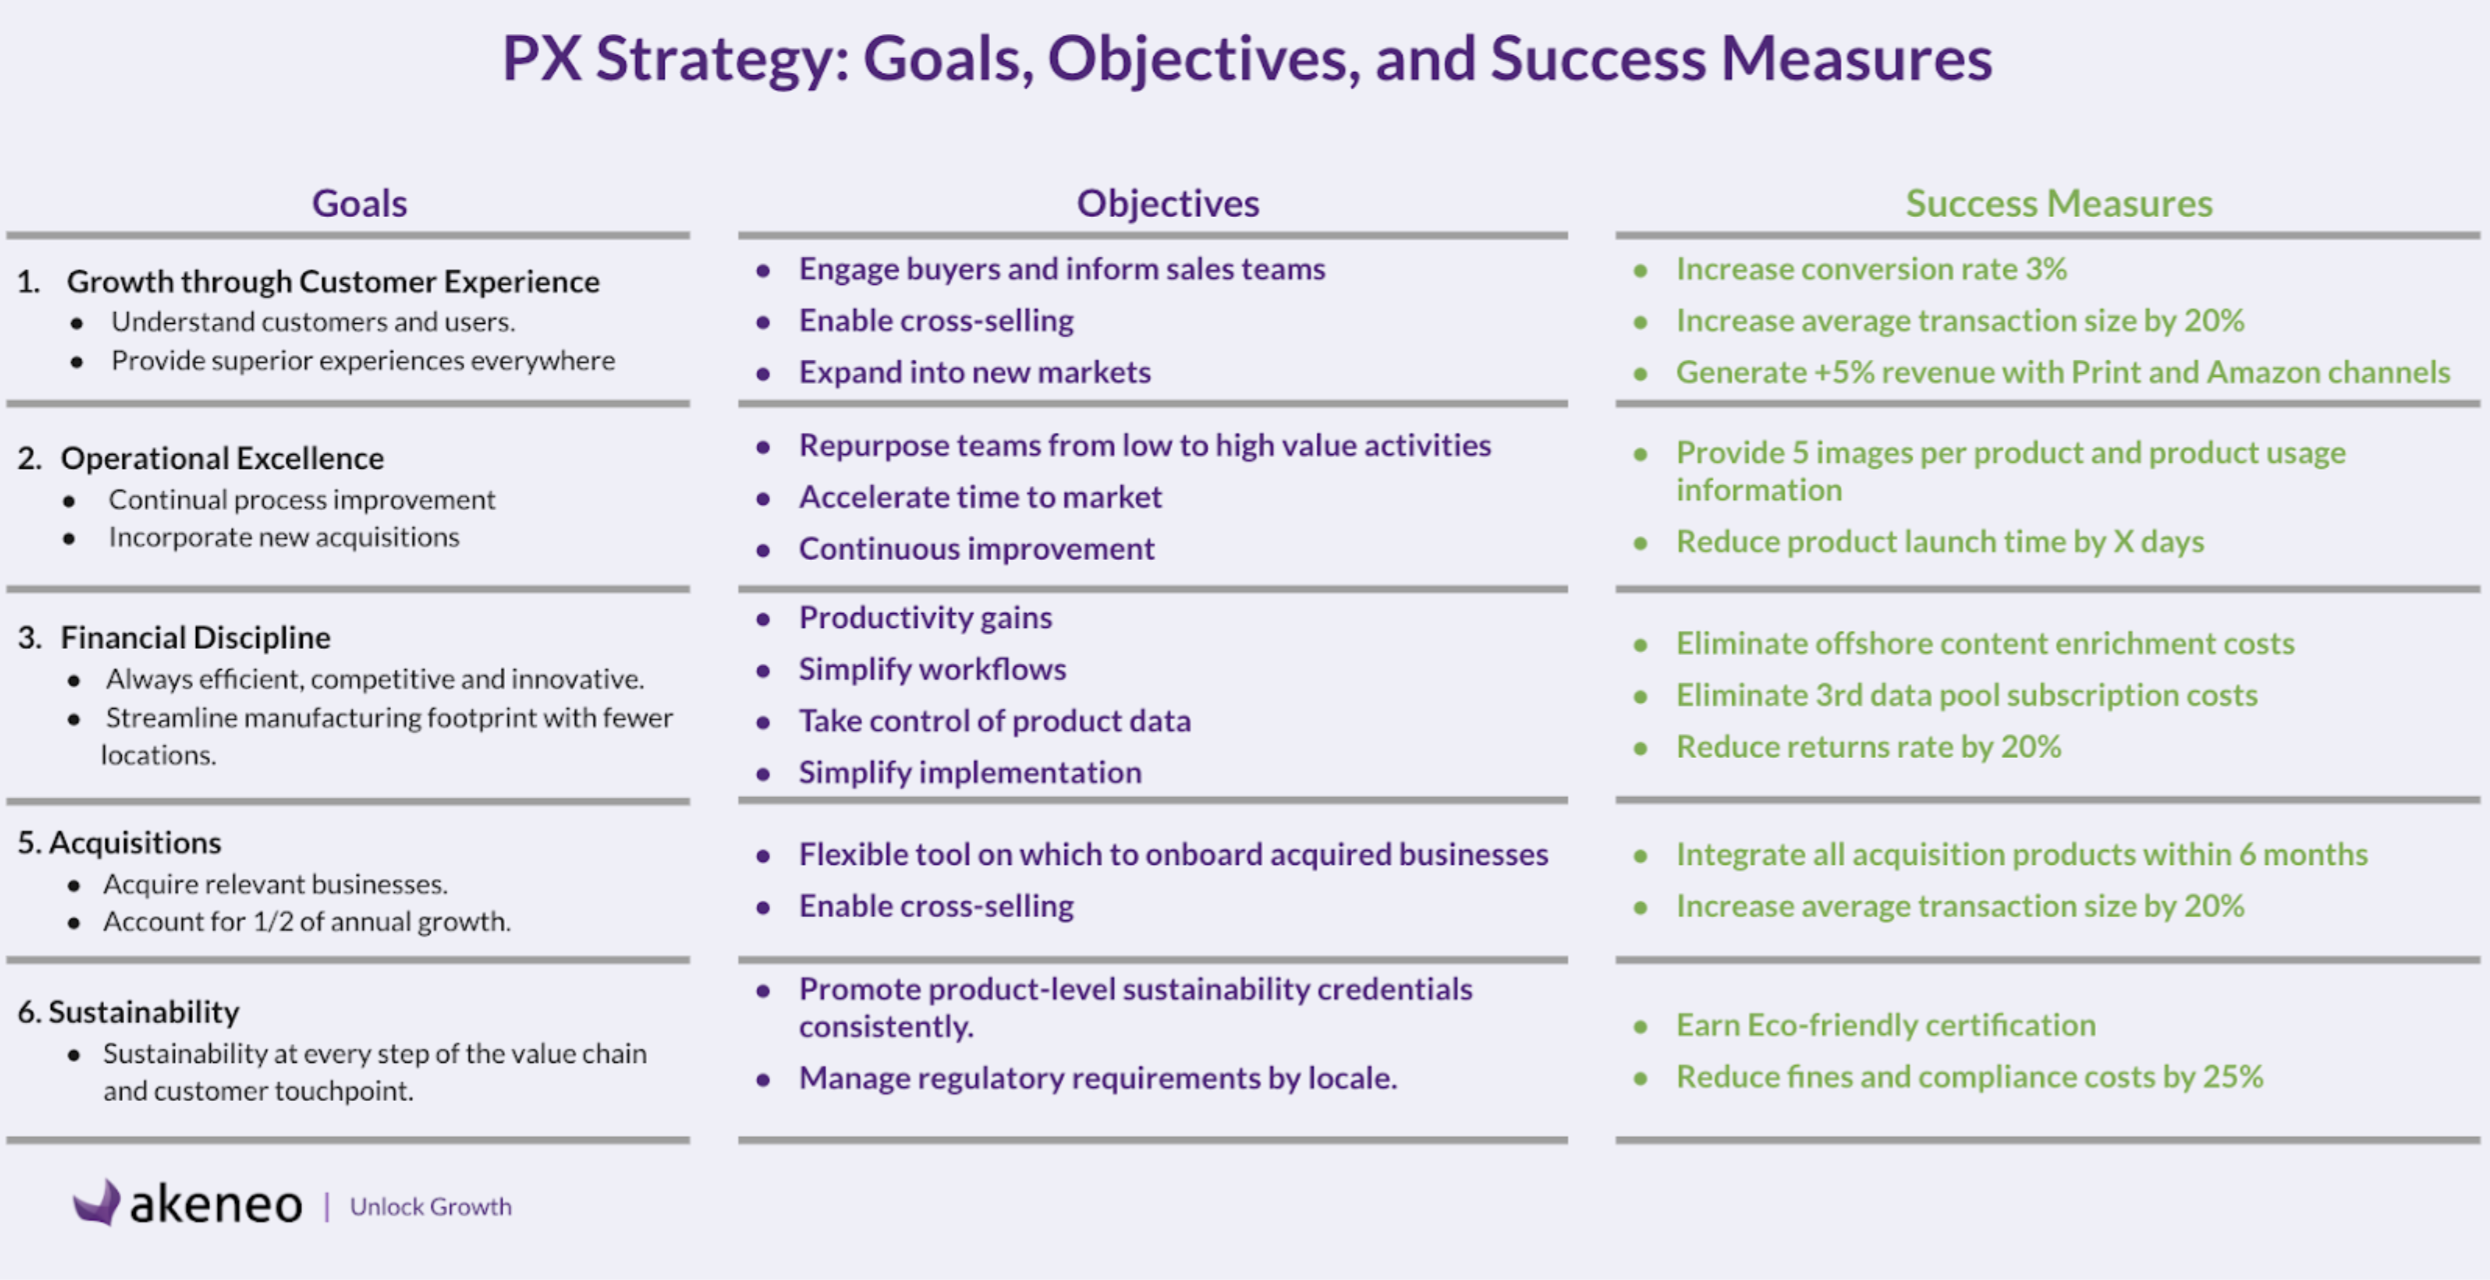 PX Strategy: Goals, Objectives, and Success Measures